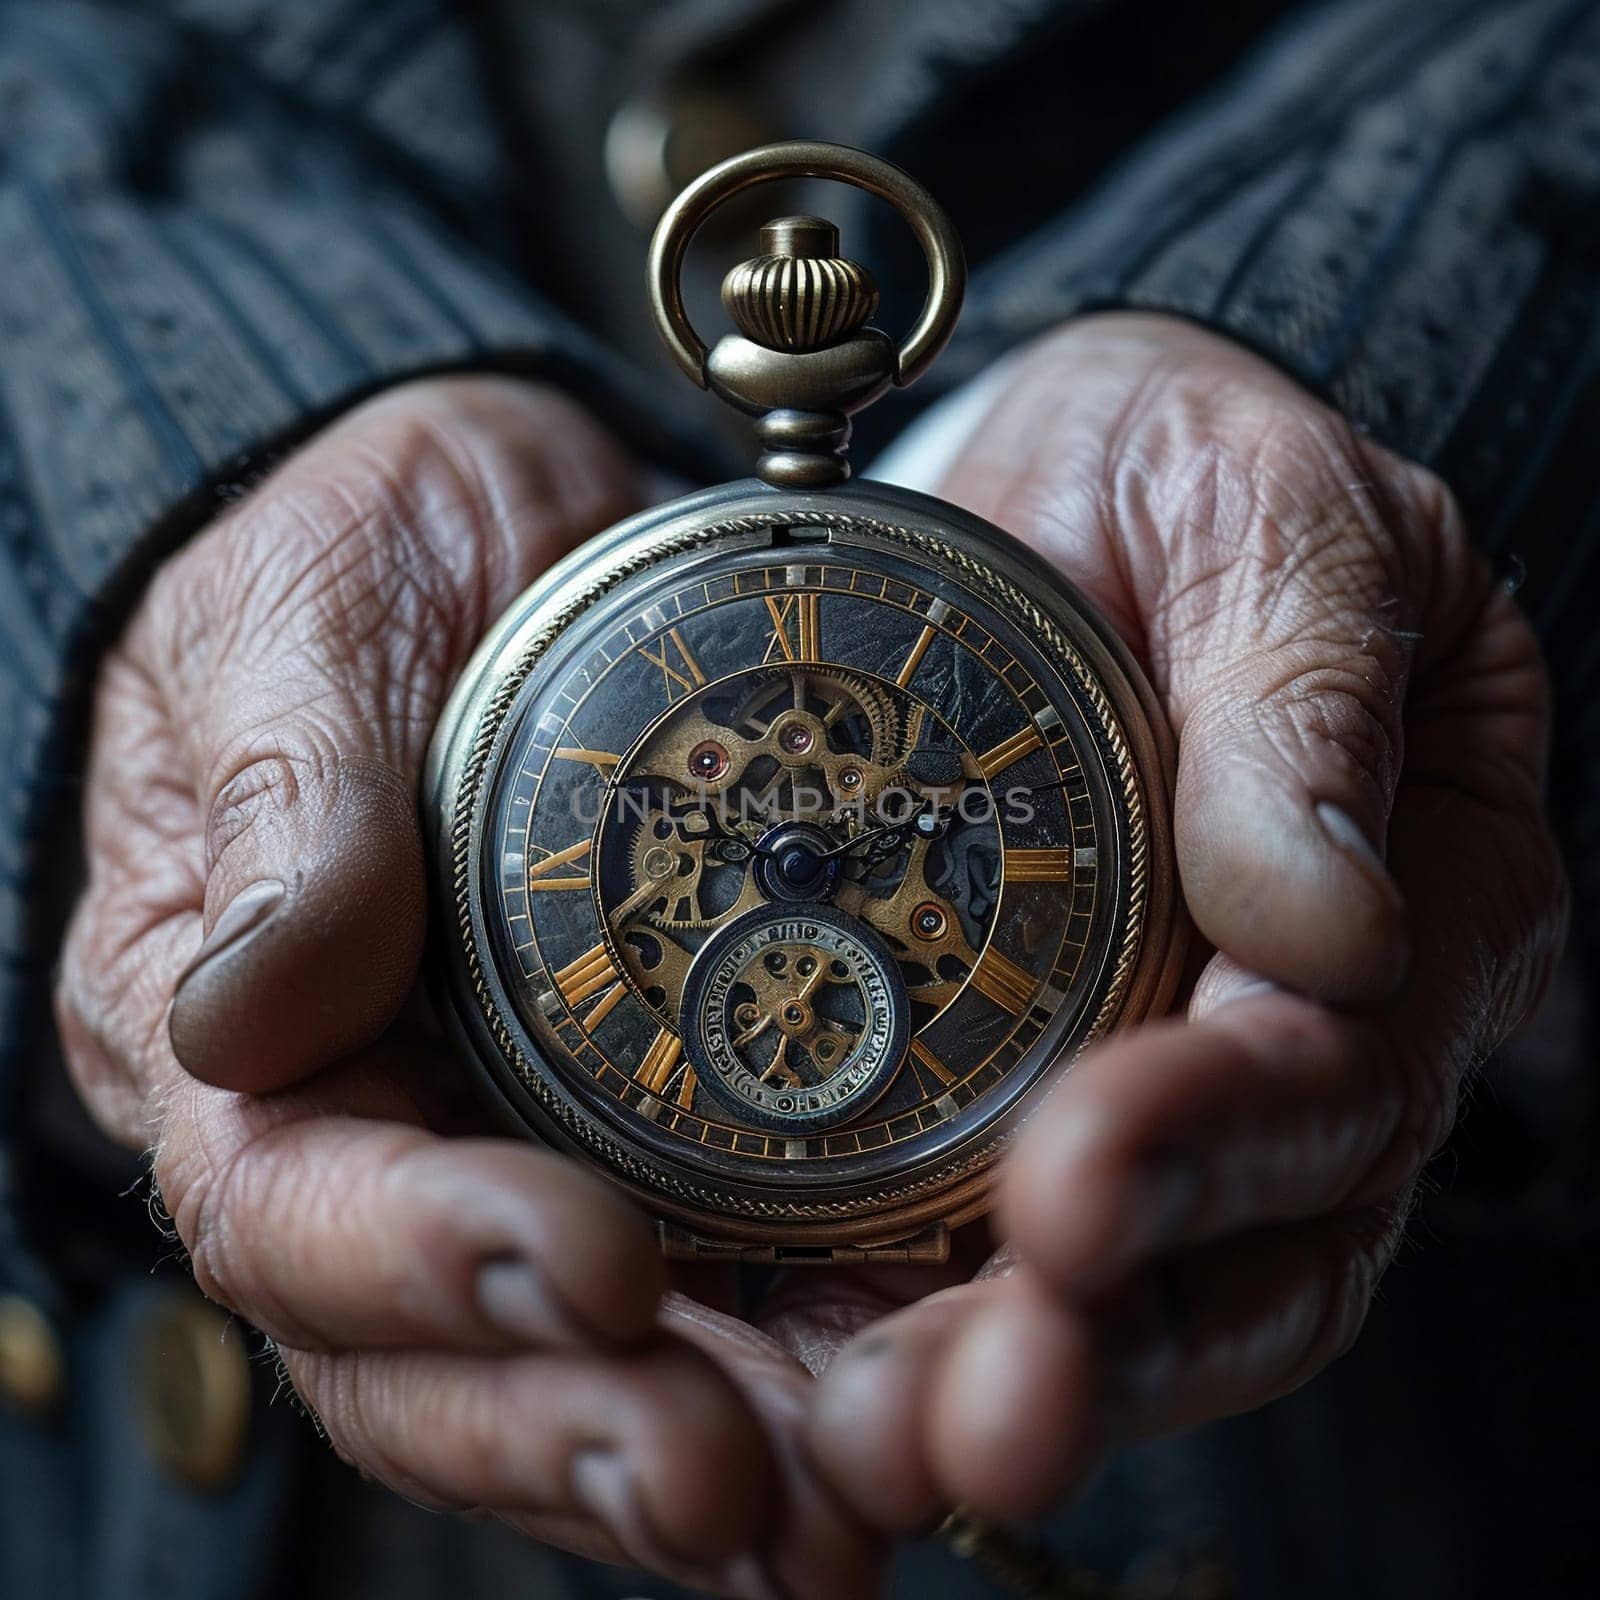 Time traveler's hands setting a vintage pocket watch, rendered with a steampunk aesthetic and Victorian flair.